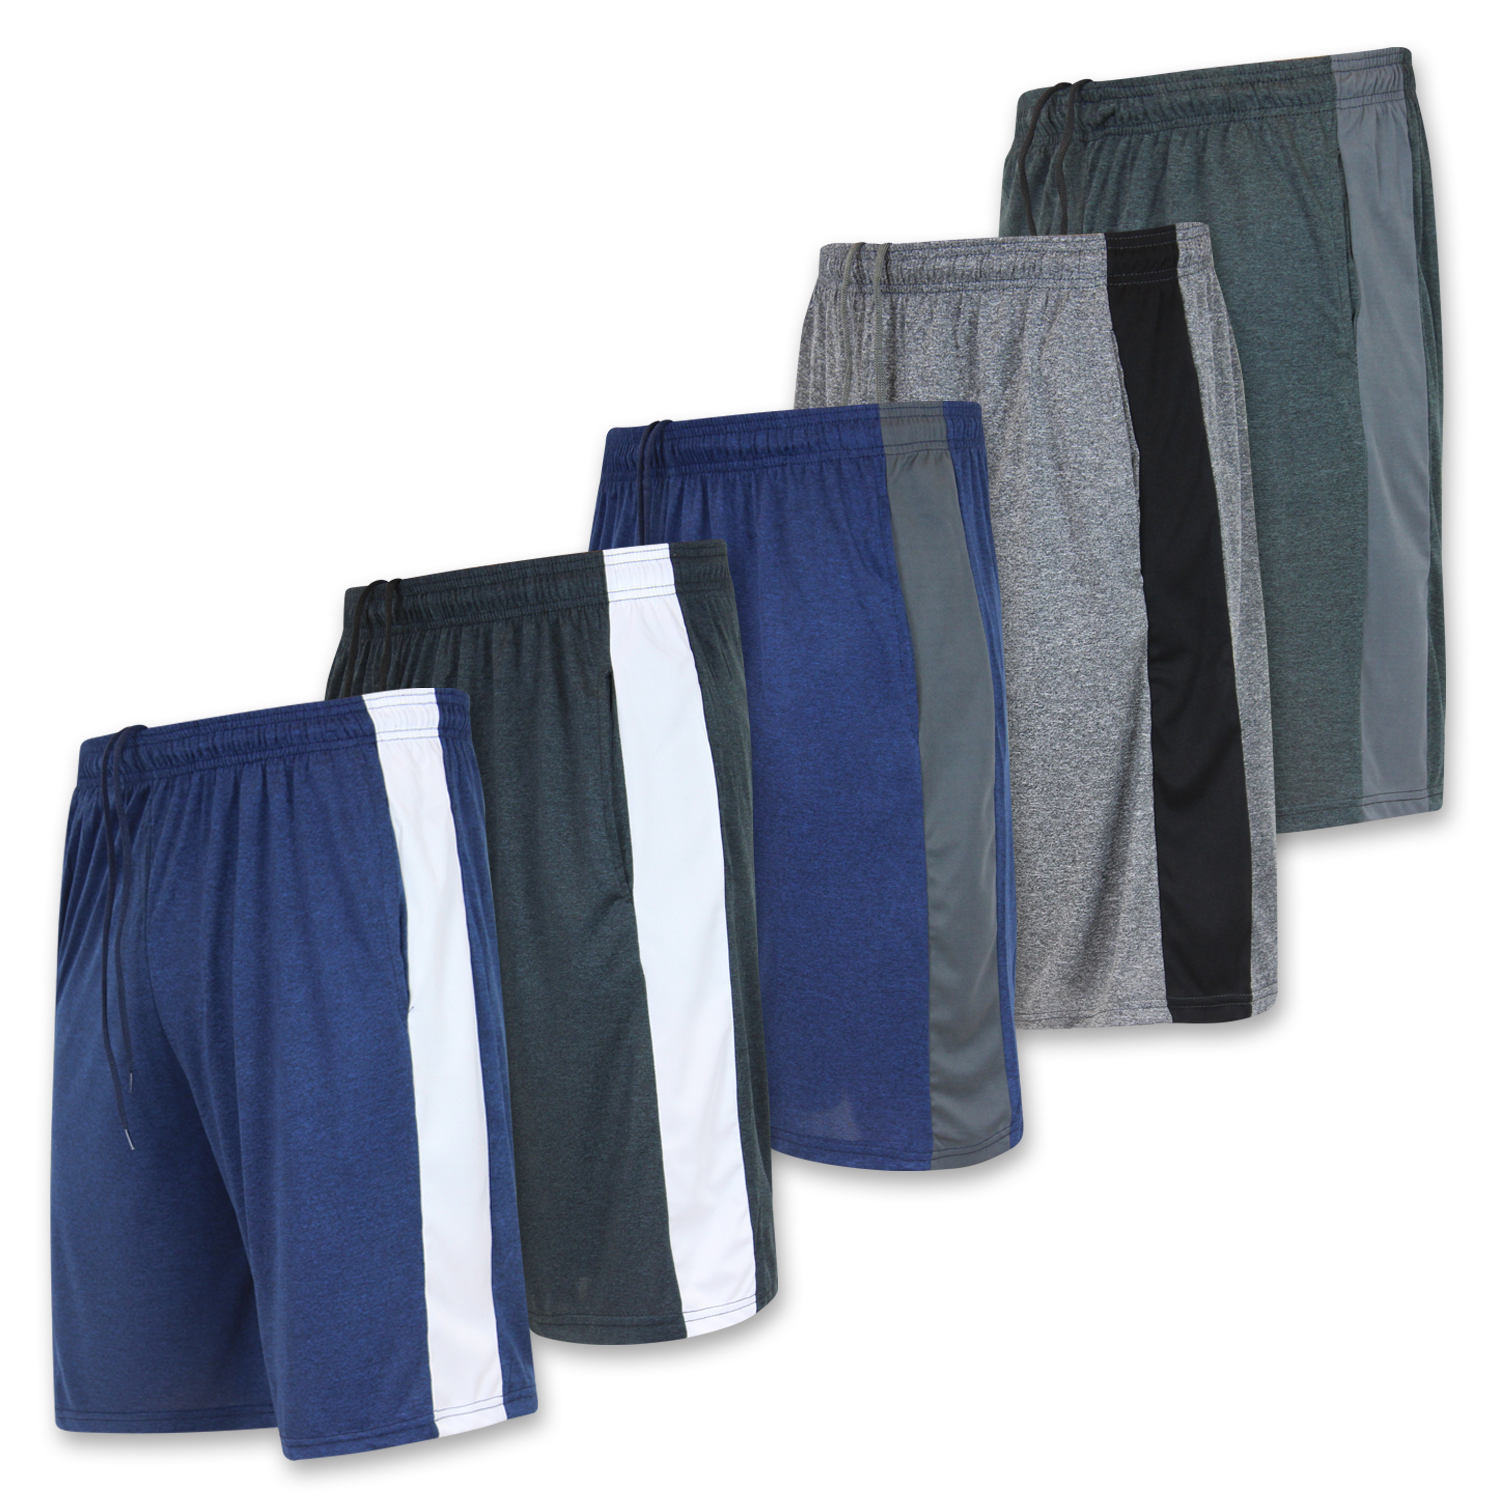 5 Pack:Mens Dry-Fit Sweat Resistant Active Athletic Performance Shorts